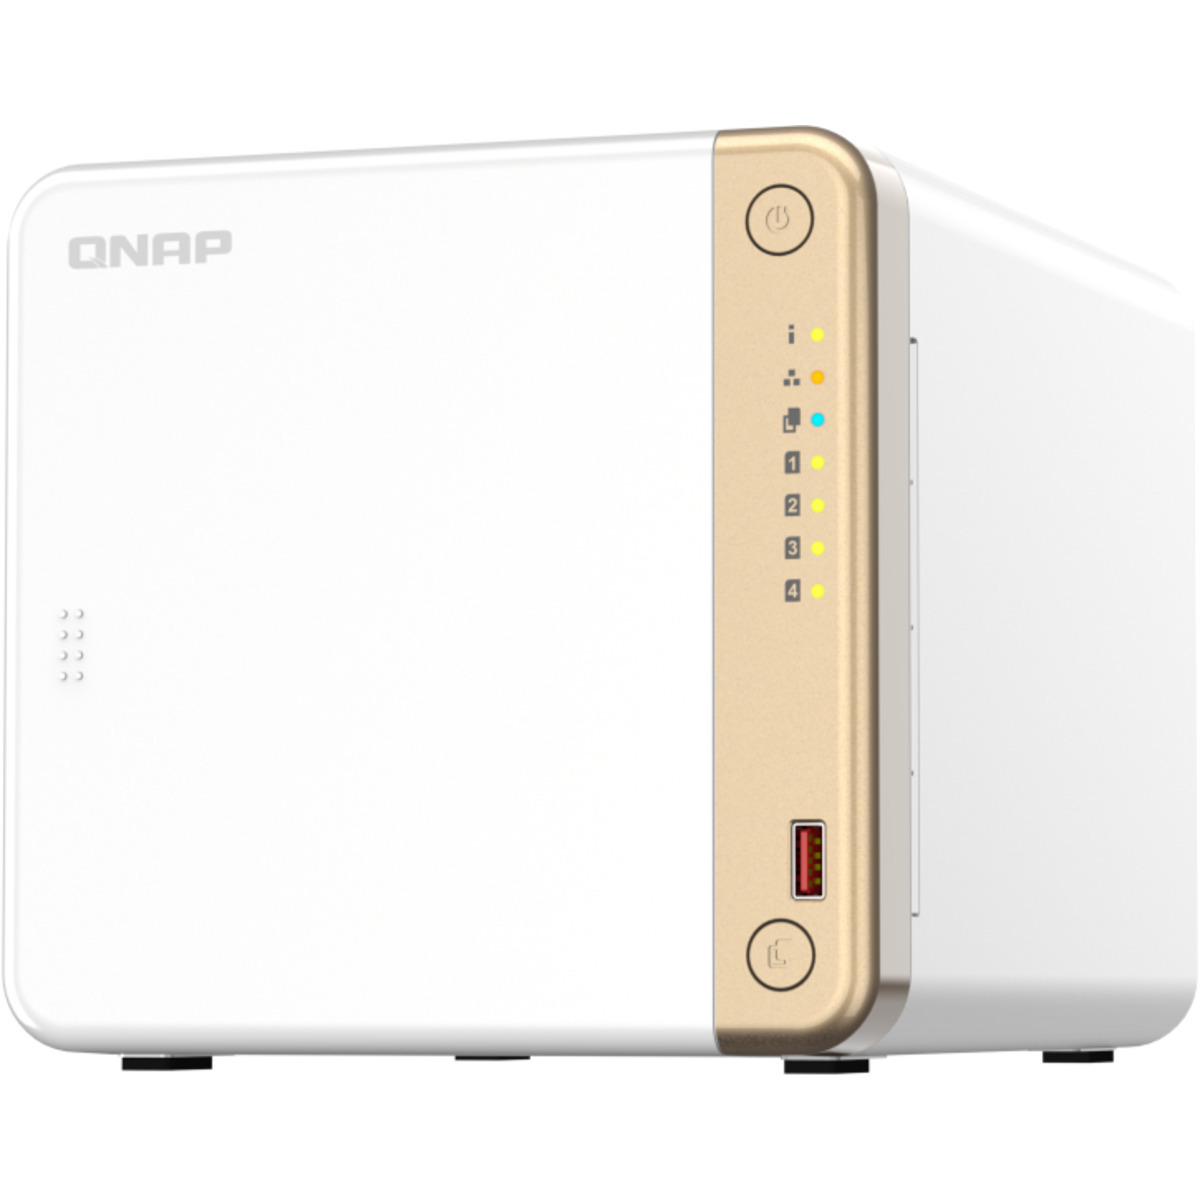 QNAP TS-462 64tb 4-Bay Desktop Multimedia / Power User / Business NAS - Network Attached Storage Device 4x16tb Seagate IronWolf Pro ST16000NT001 3.5 7200rpm SATA 6Gb/s HDD NAS Class Drives Installed - Burn-In Tested - ON SALE TS-462